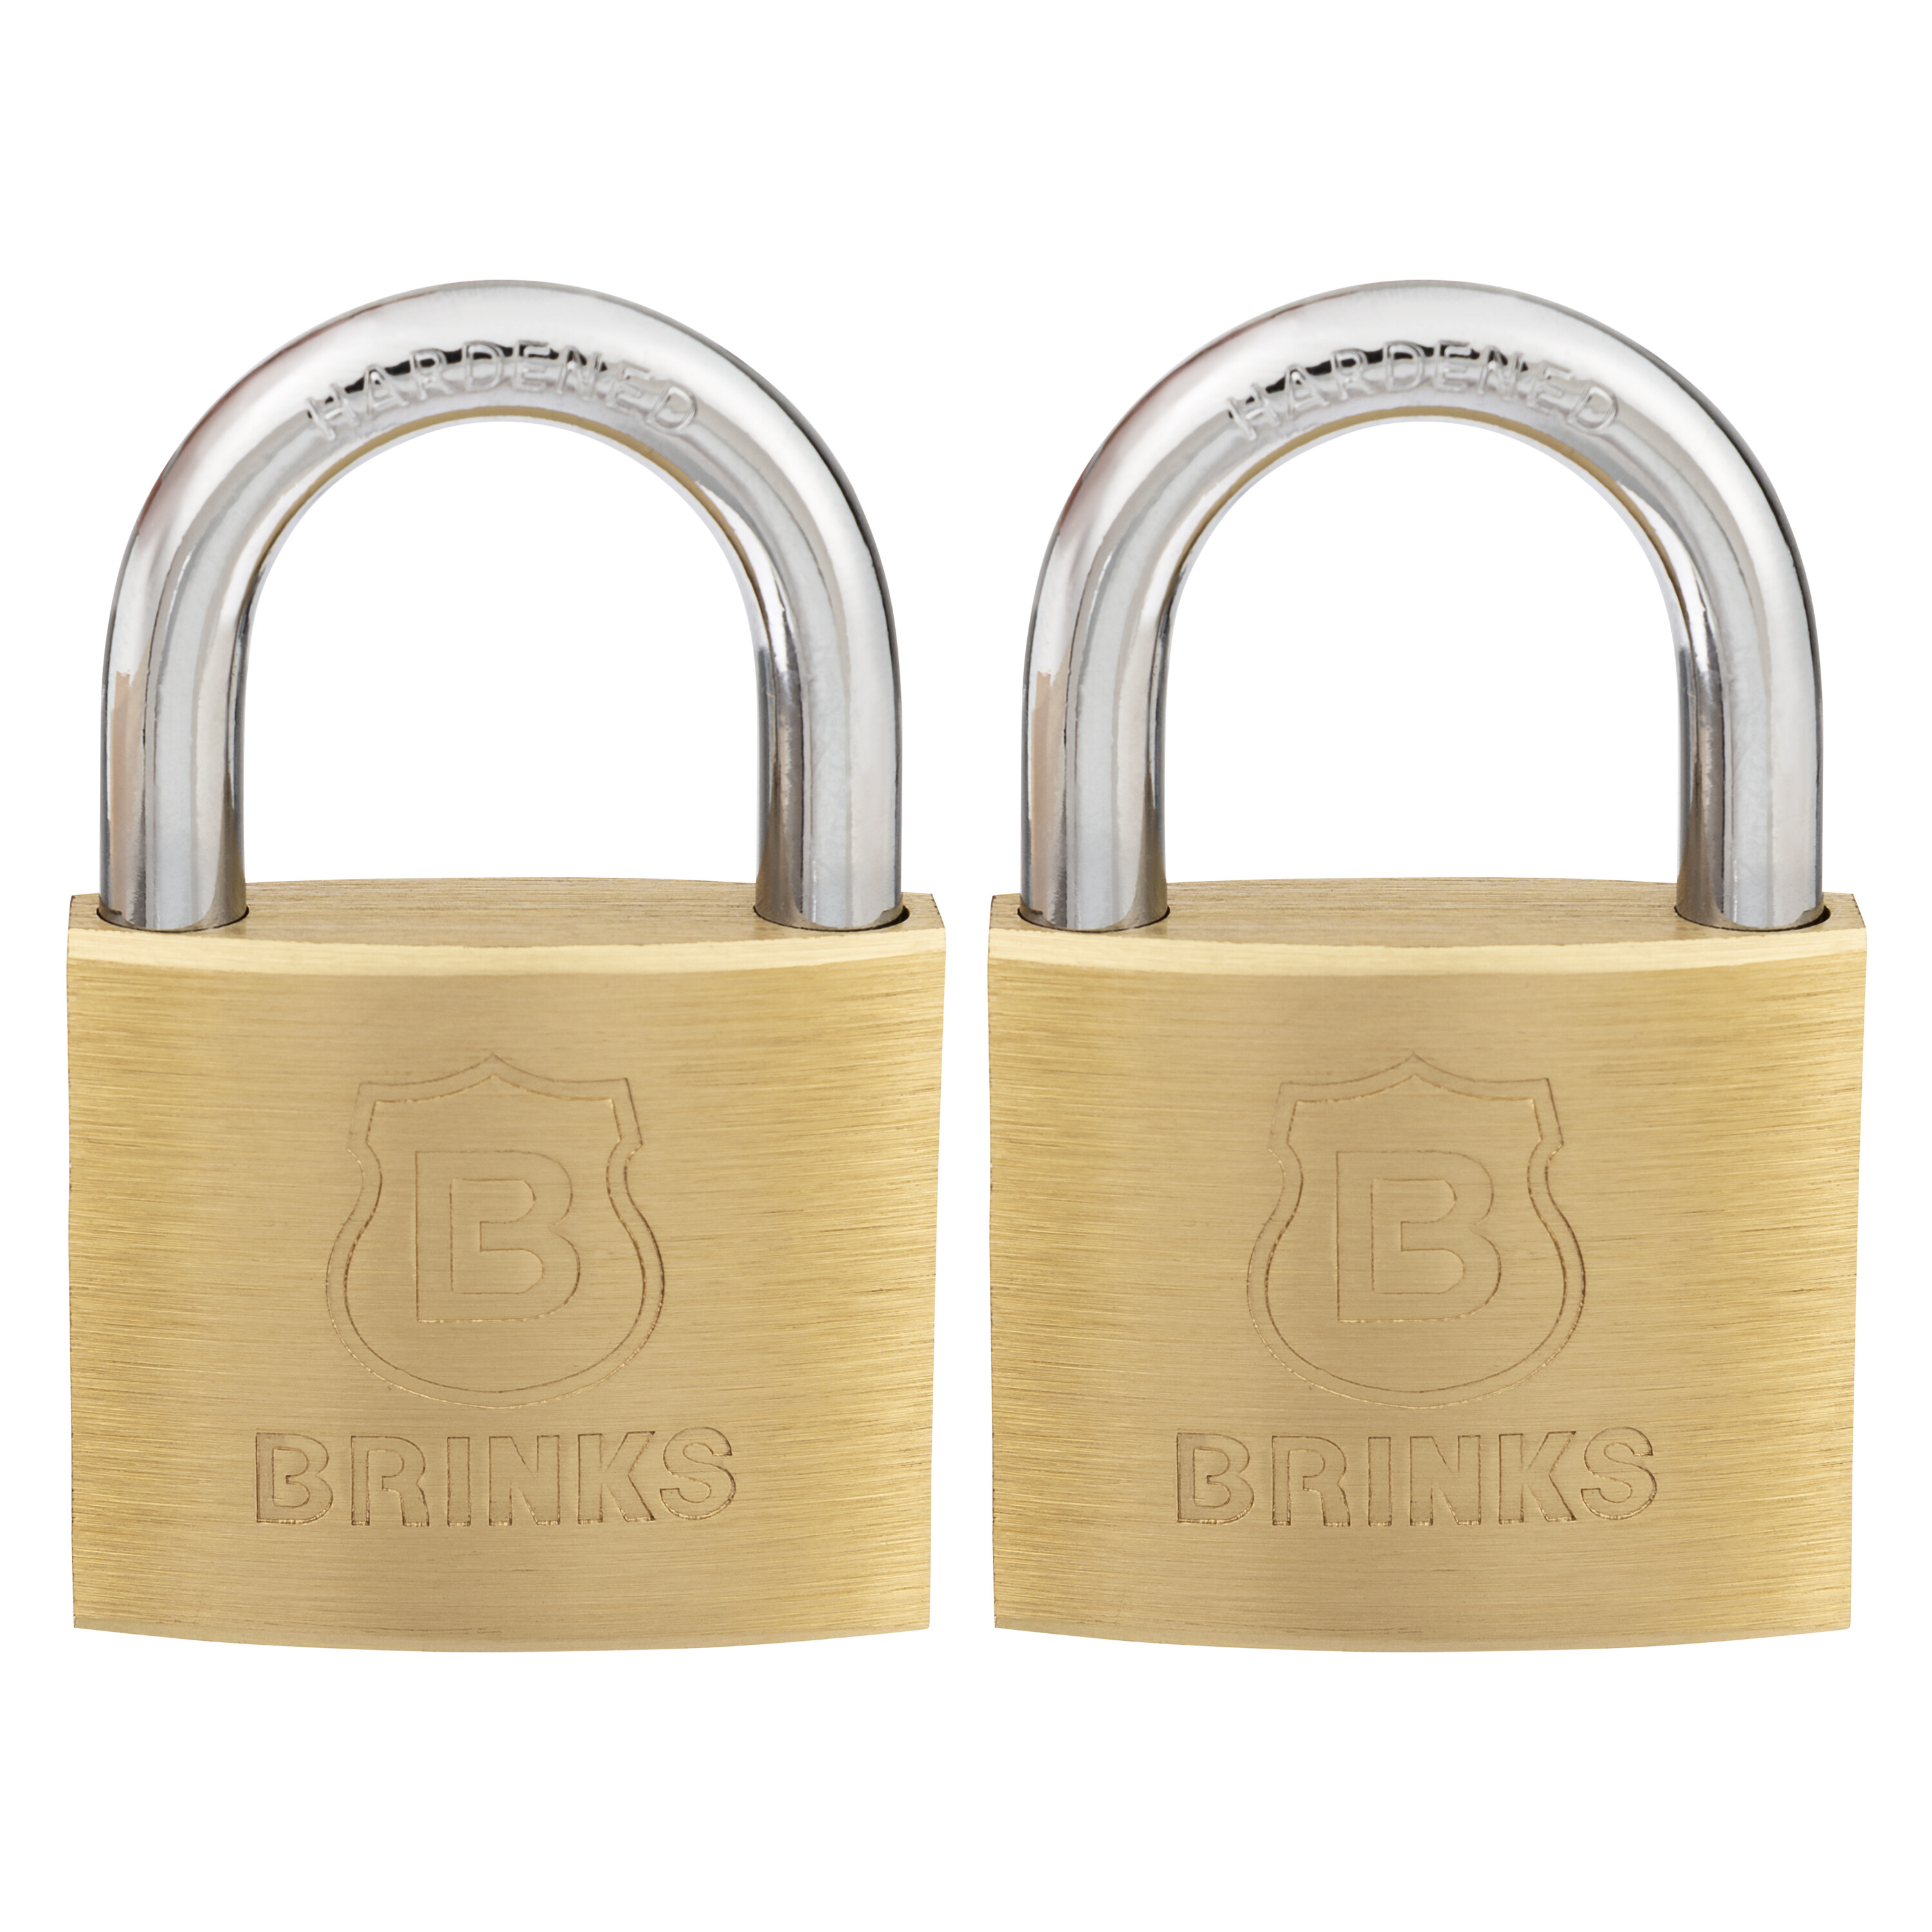 Brass Padlock 30 mm with brass cylinder and hardened steel shackle